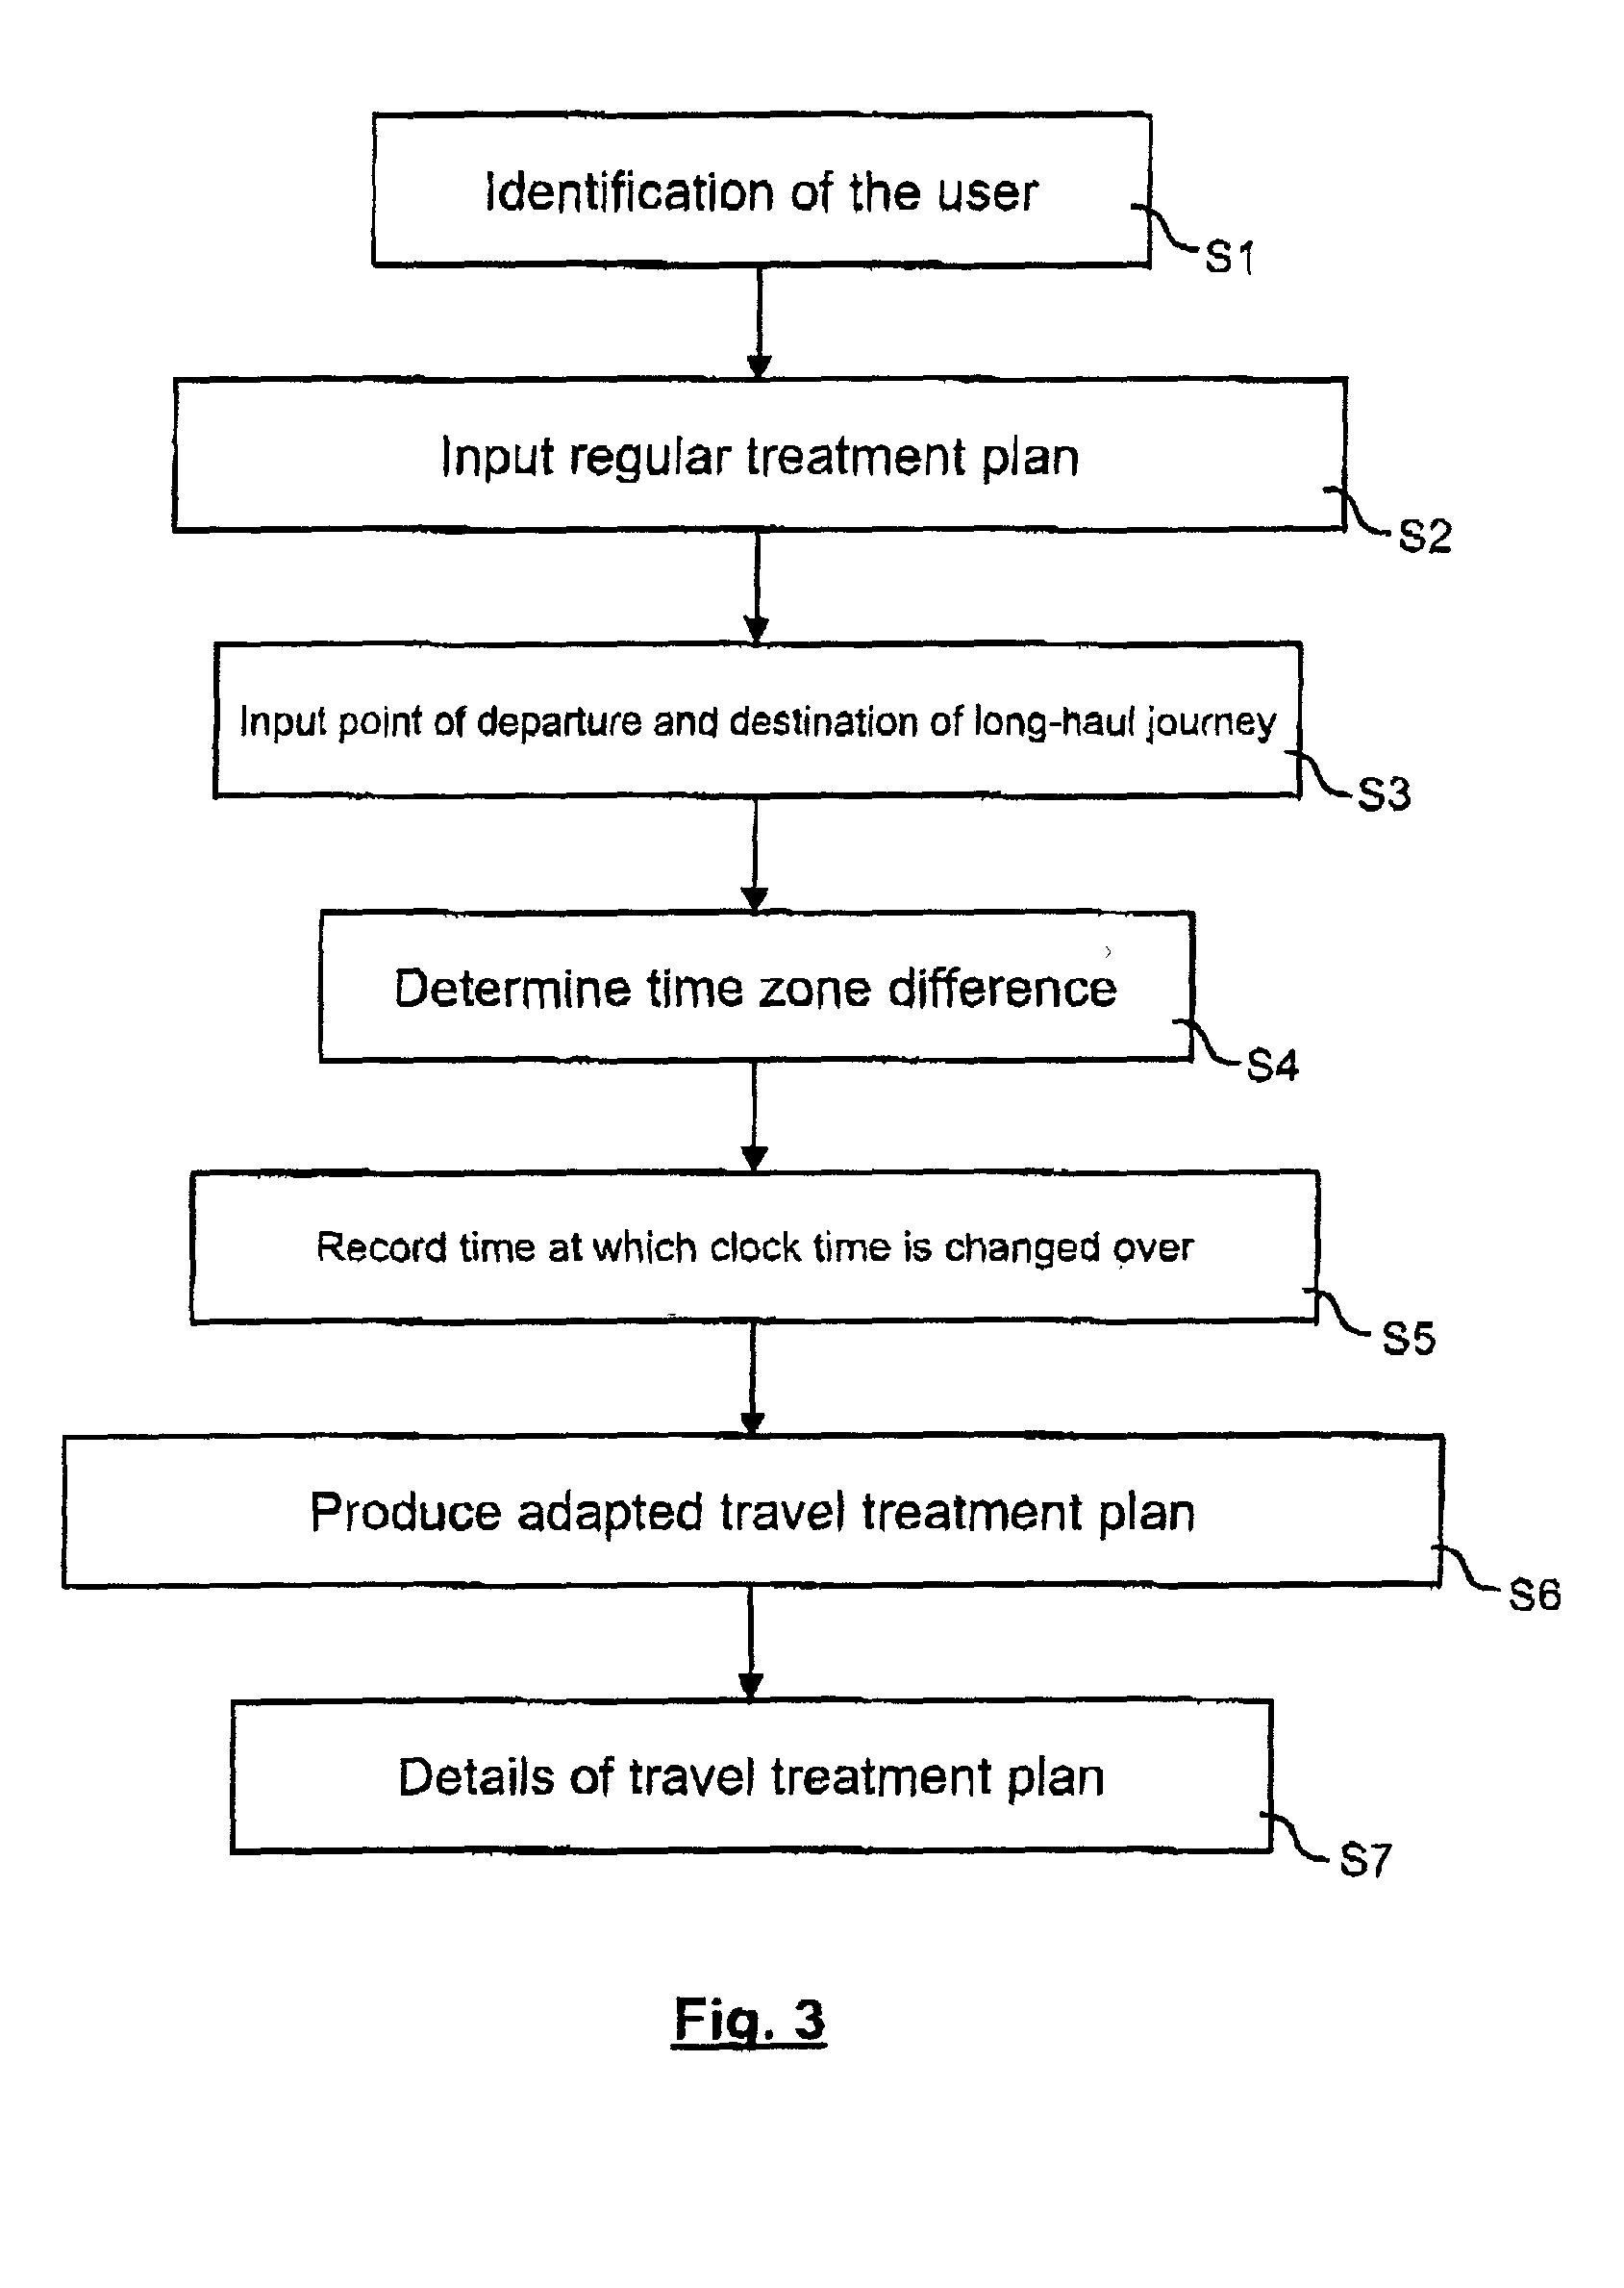 Method and device for producing an adapted travel treatment plan for administering a medicine in the event of a long-haul journey